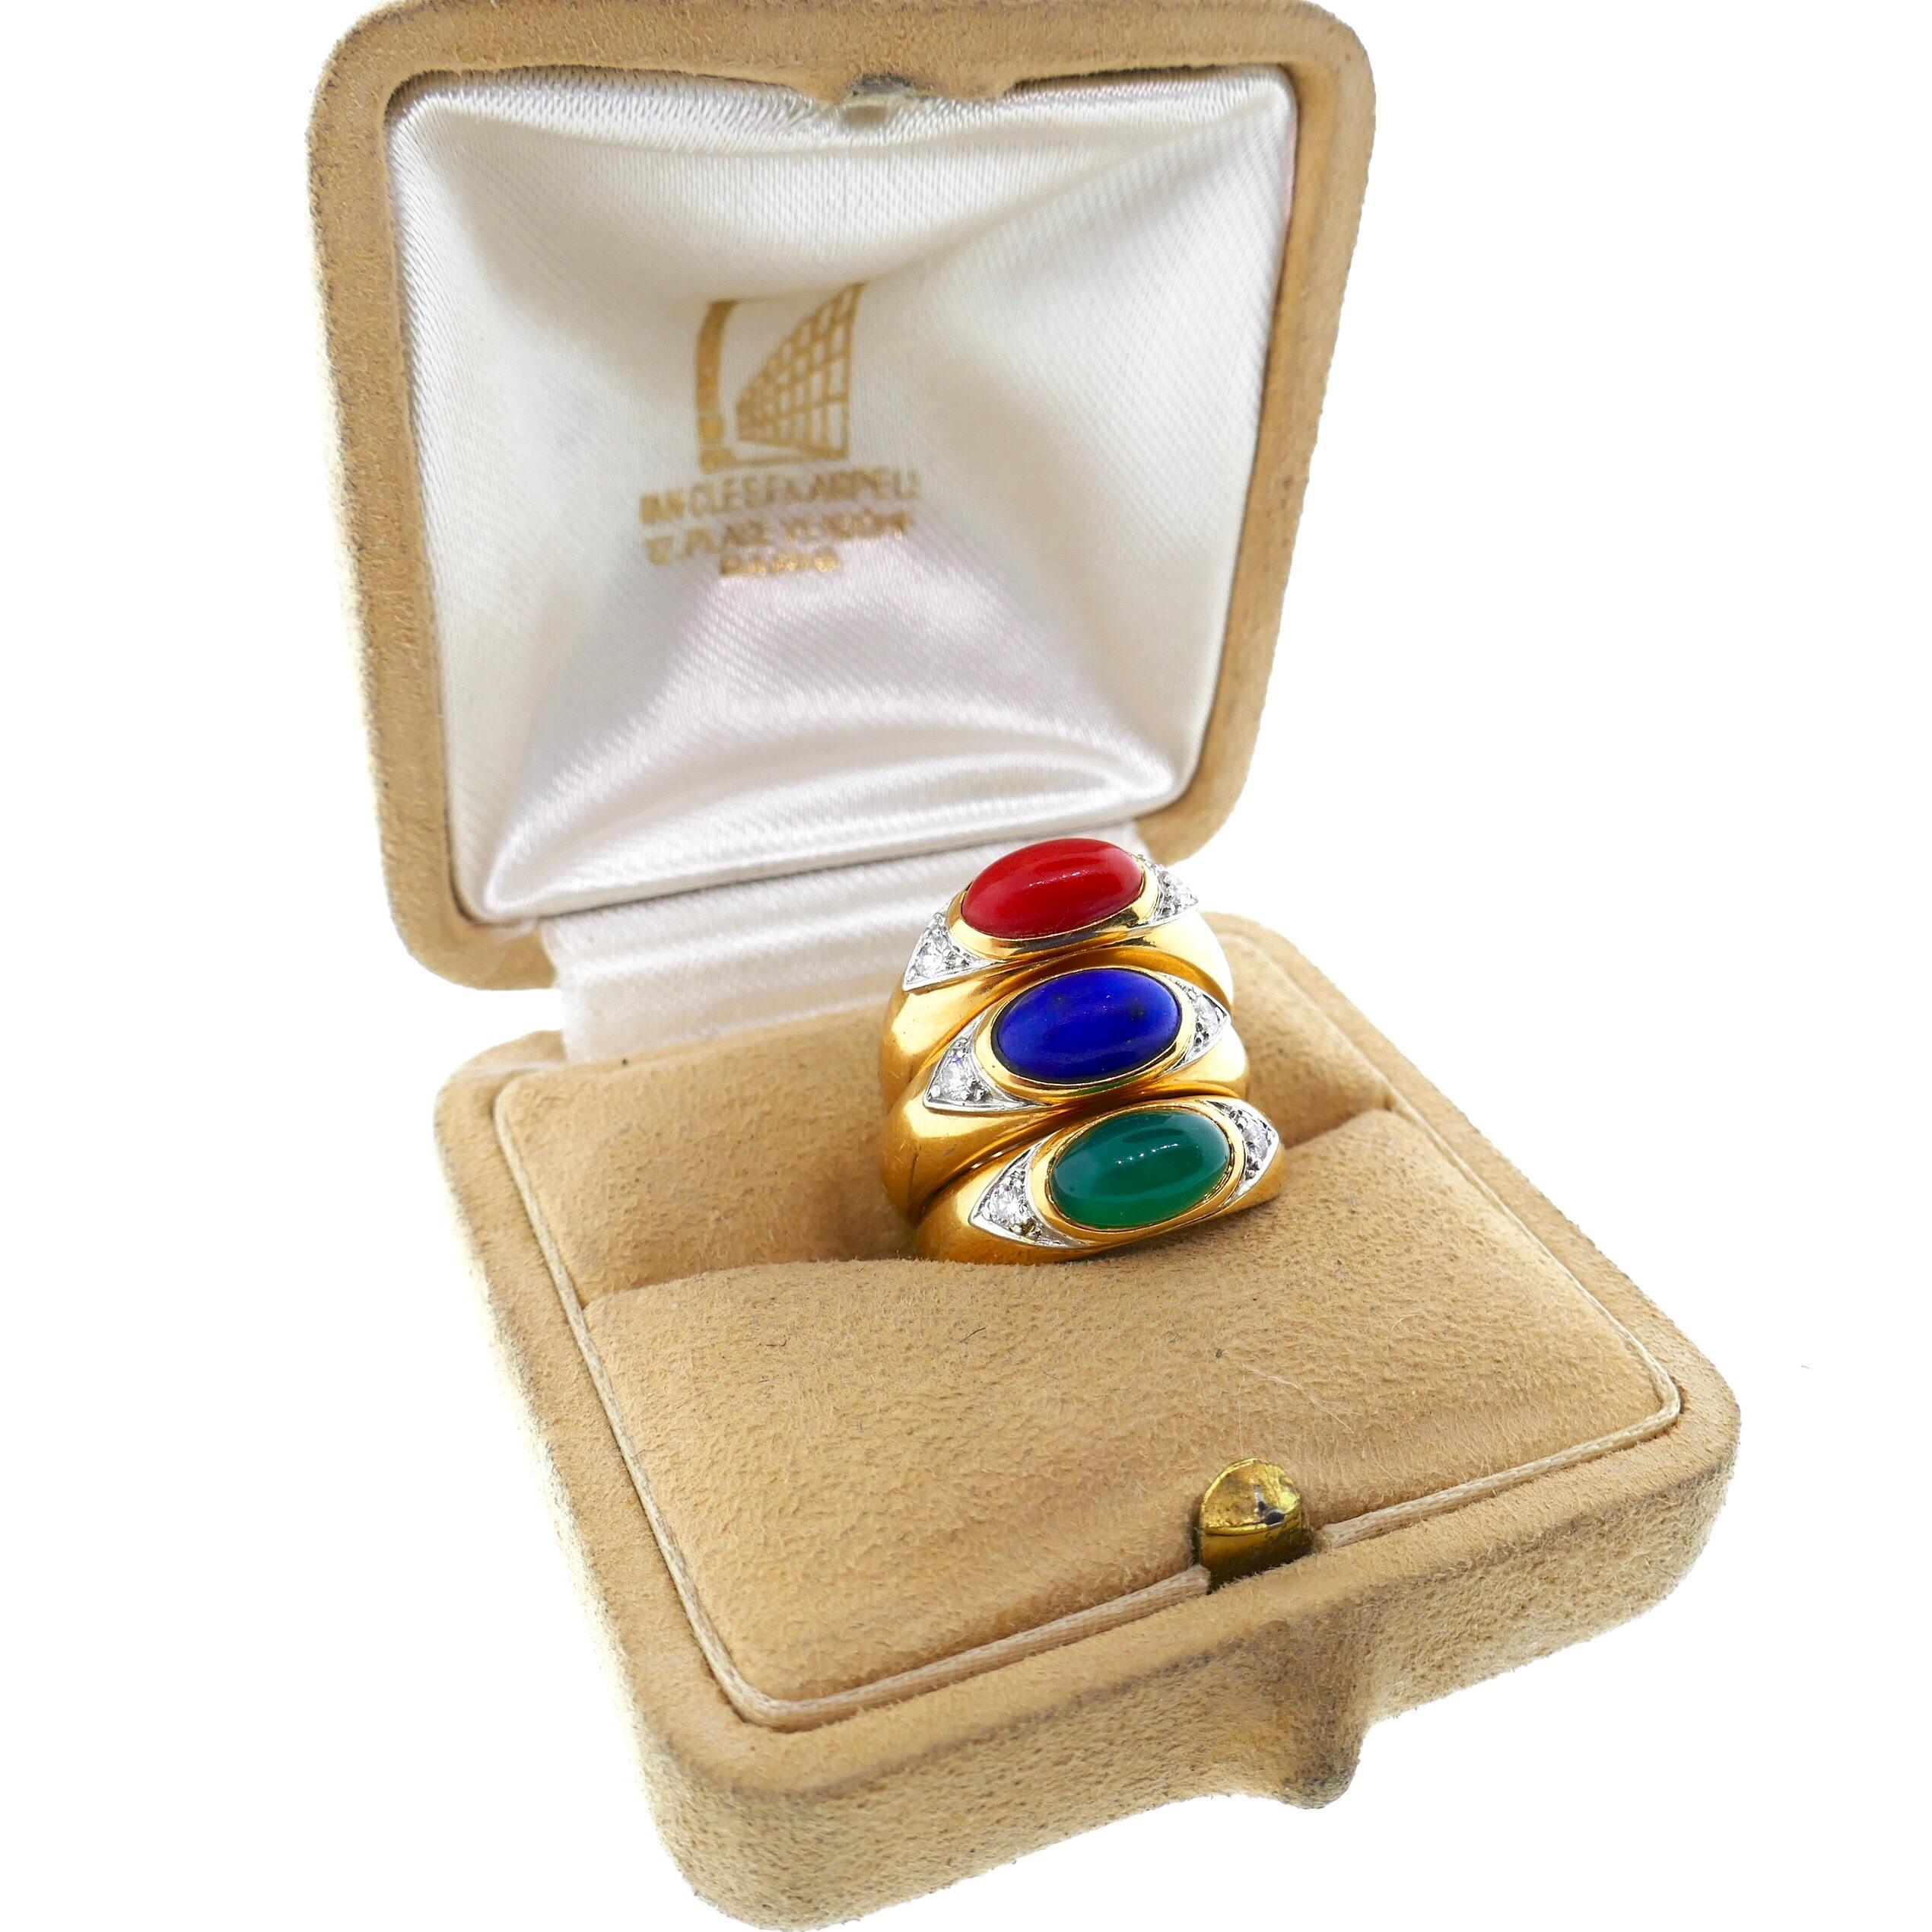 Van Cleef & Arpels Coral Lapis Chrysoprase Ring Set 

This is a highly collectable Van Cleef & Arpels three ring set. Each of the rings feature a different center stone, coral, lapis, and chrysoprase. The center stones are offset by excellent